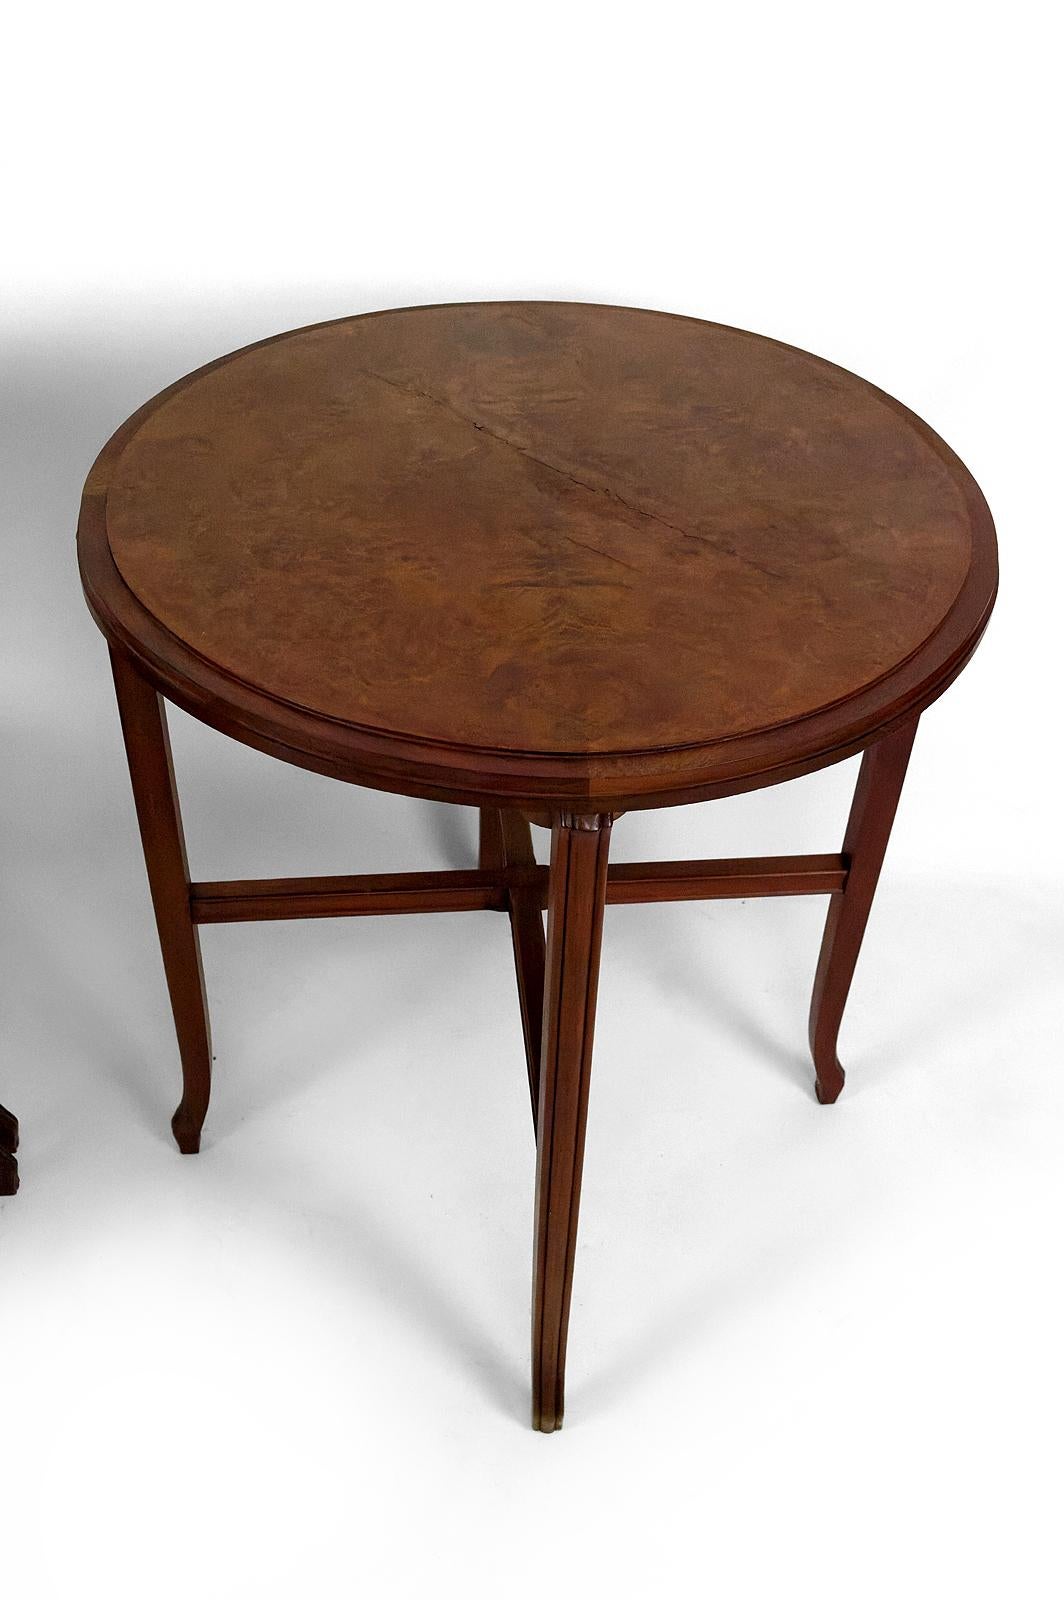 Serving table / nesting tables convertible into 2 side tables, Art Nouveau, 1910 For Sale 5